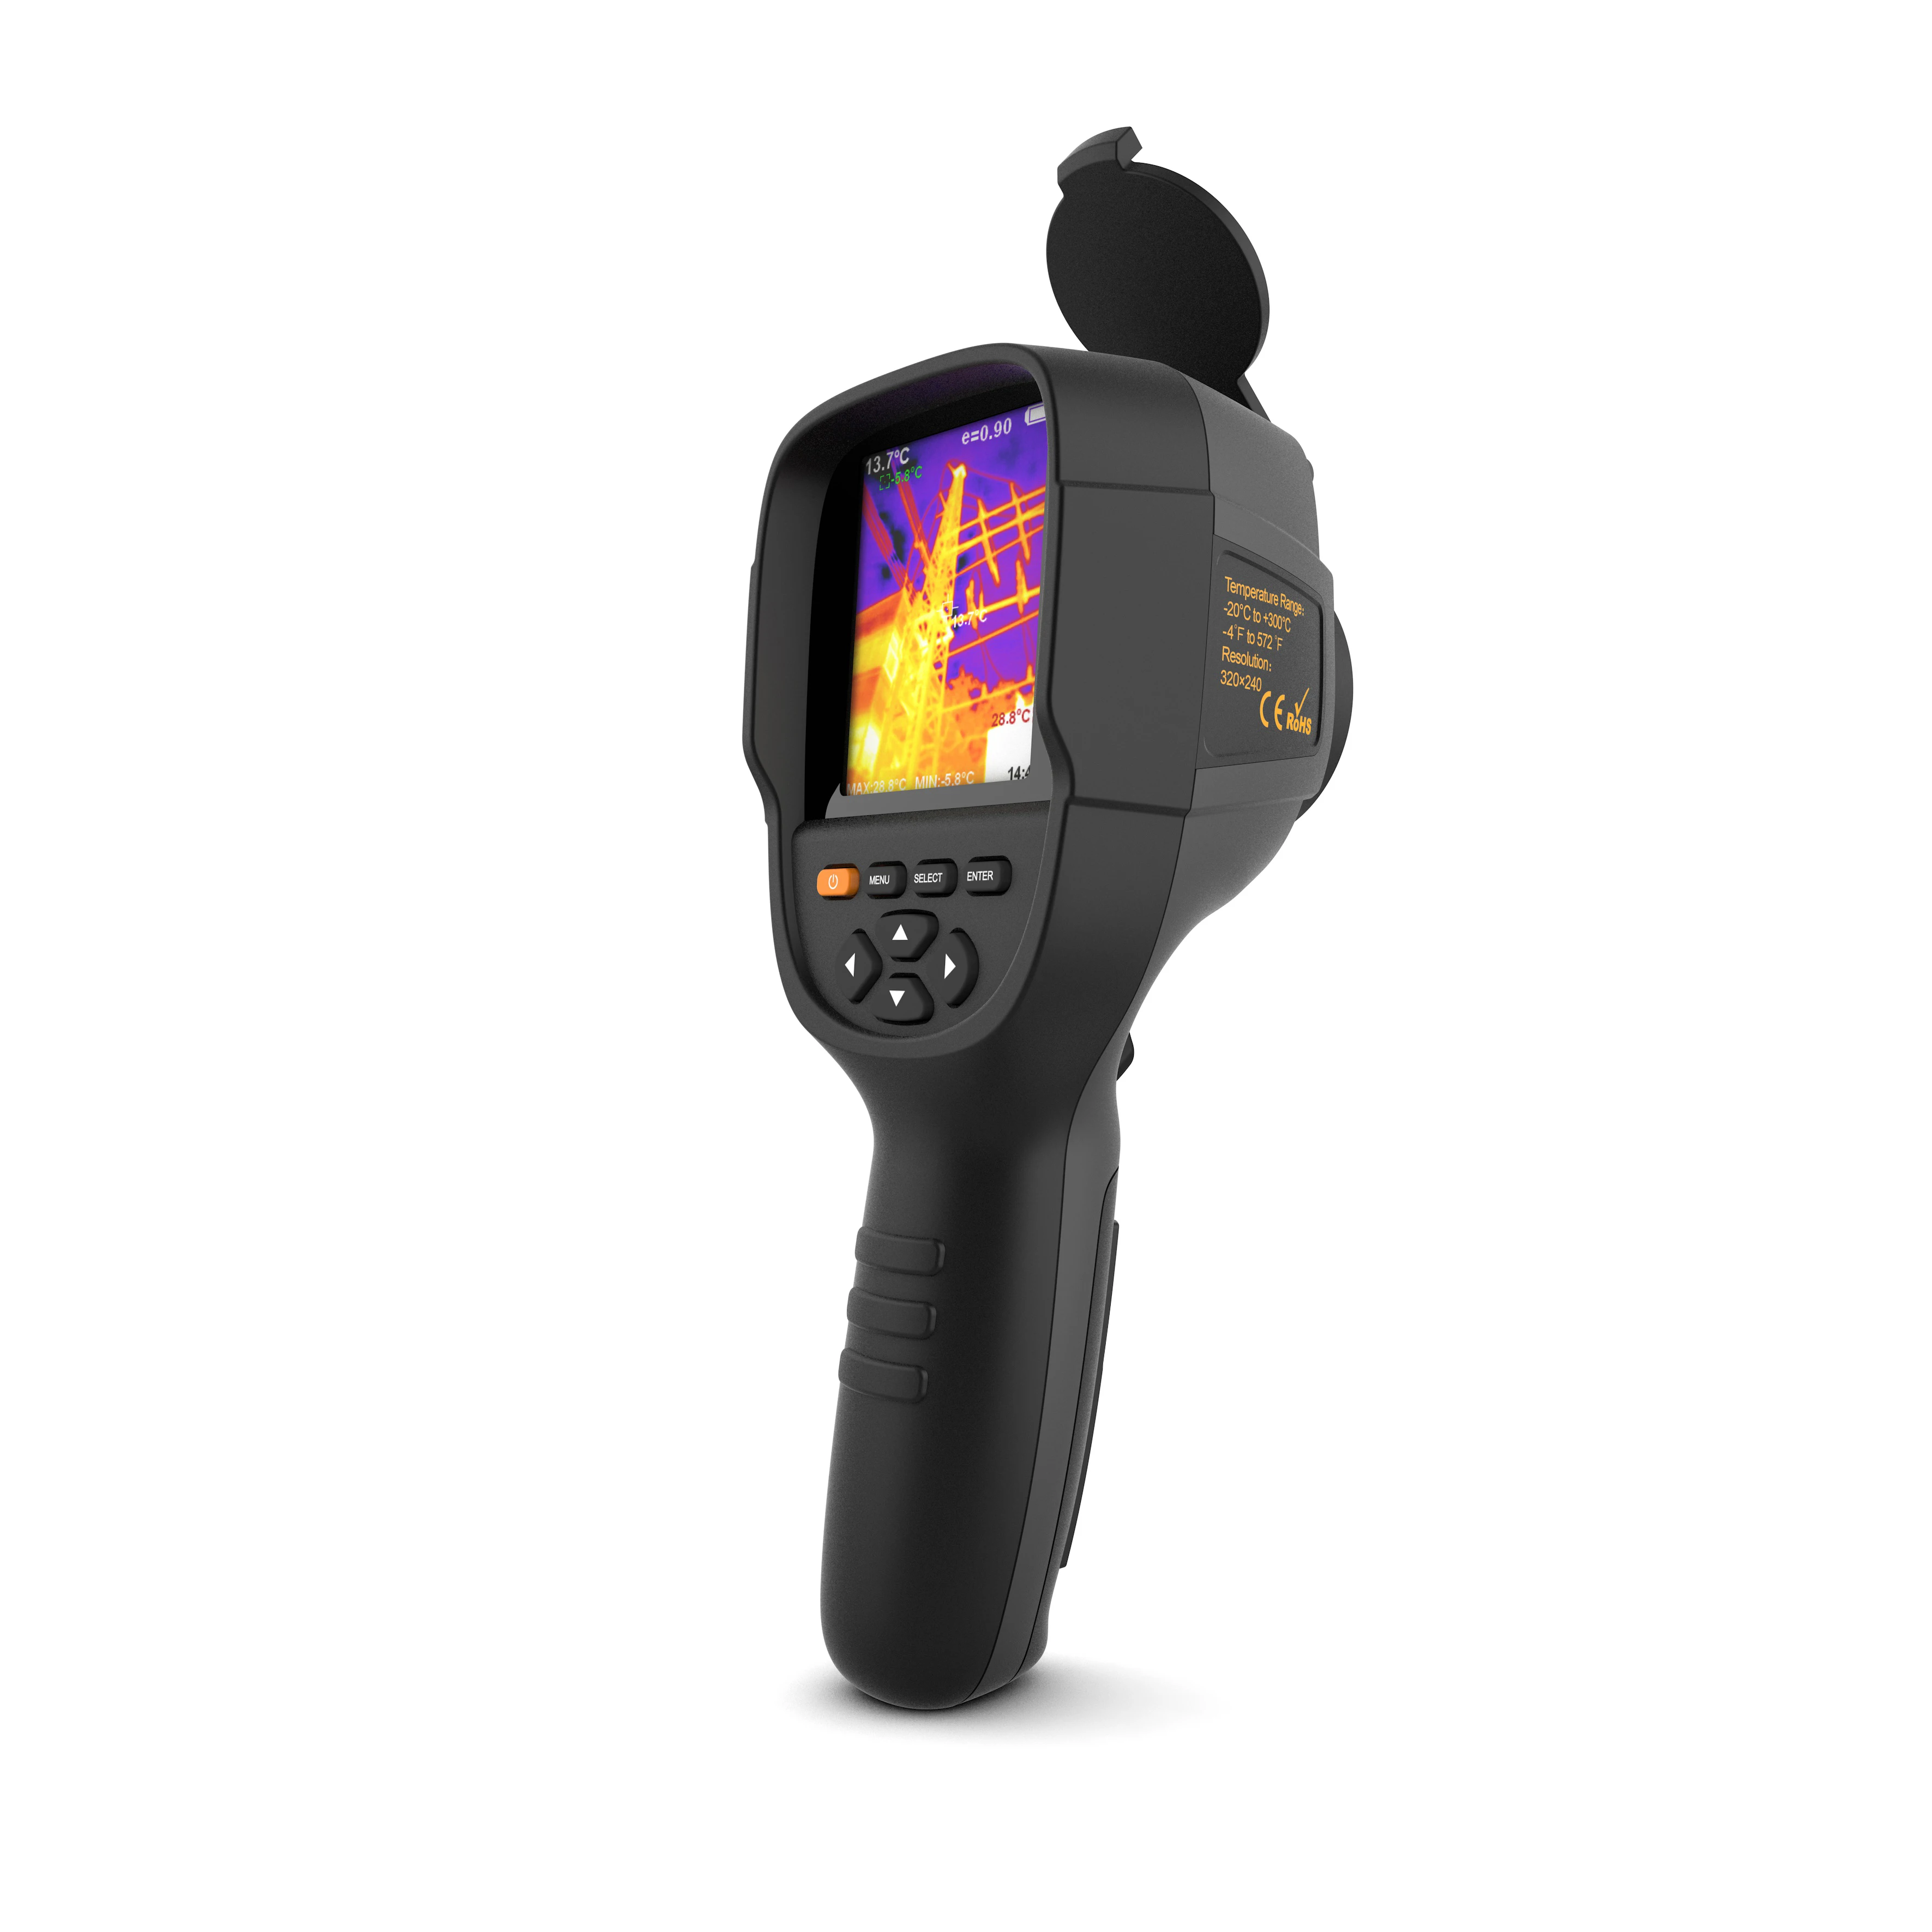 

HTI Floorheating and Electrical Power Device Detecting Thermal Imager HT-19 320*240 Thermal Imaging Camera -20~300 Degree OEM